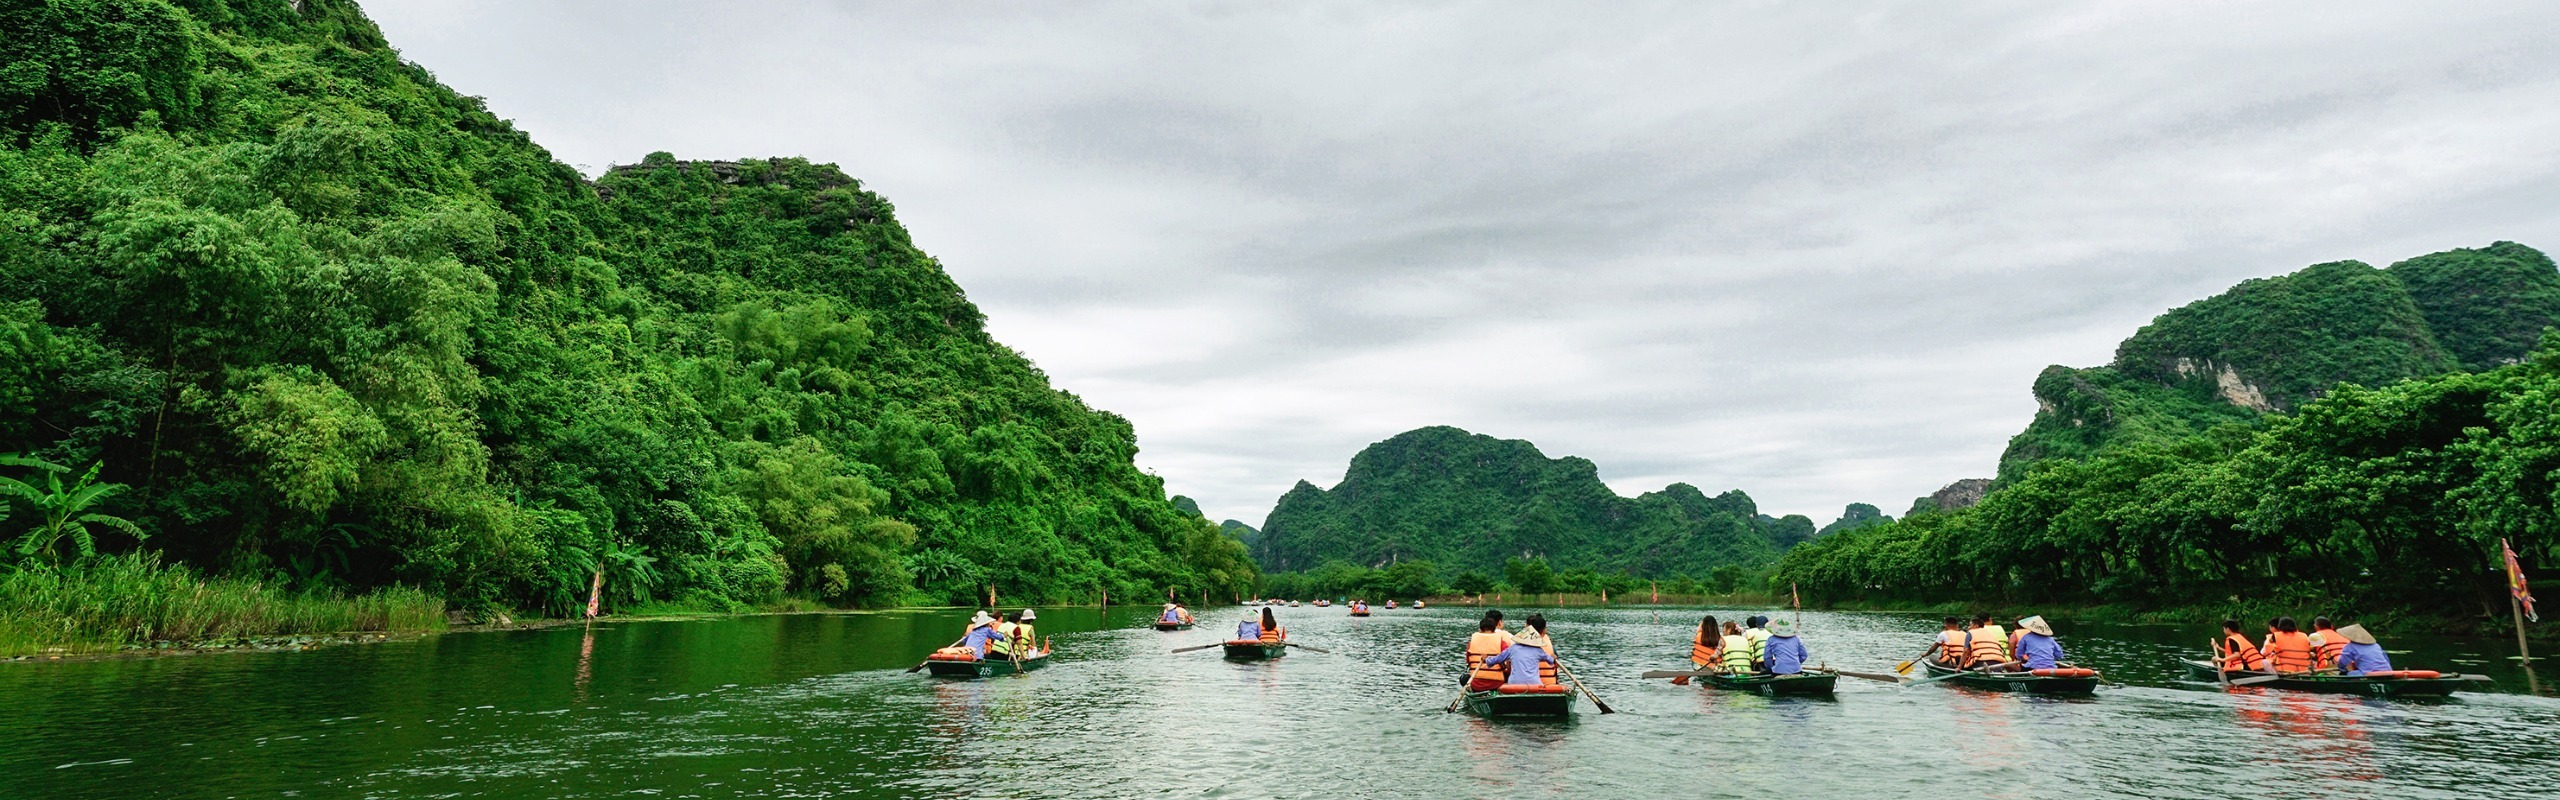 The Top 7 Day Trips from Hanoi: How to Choose (Expert Guide)